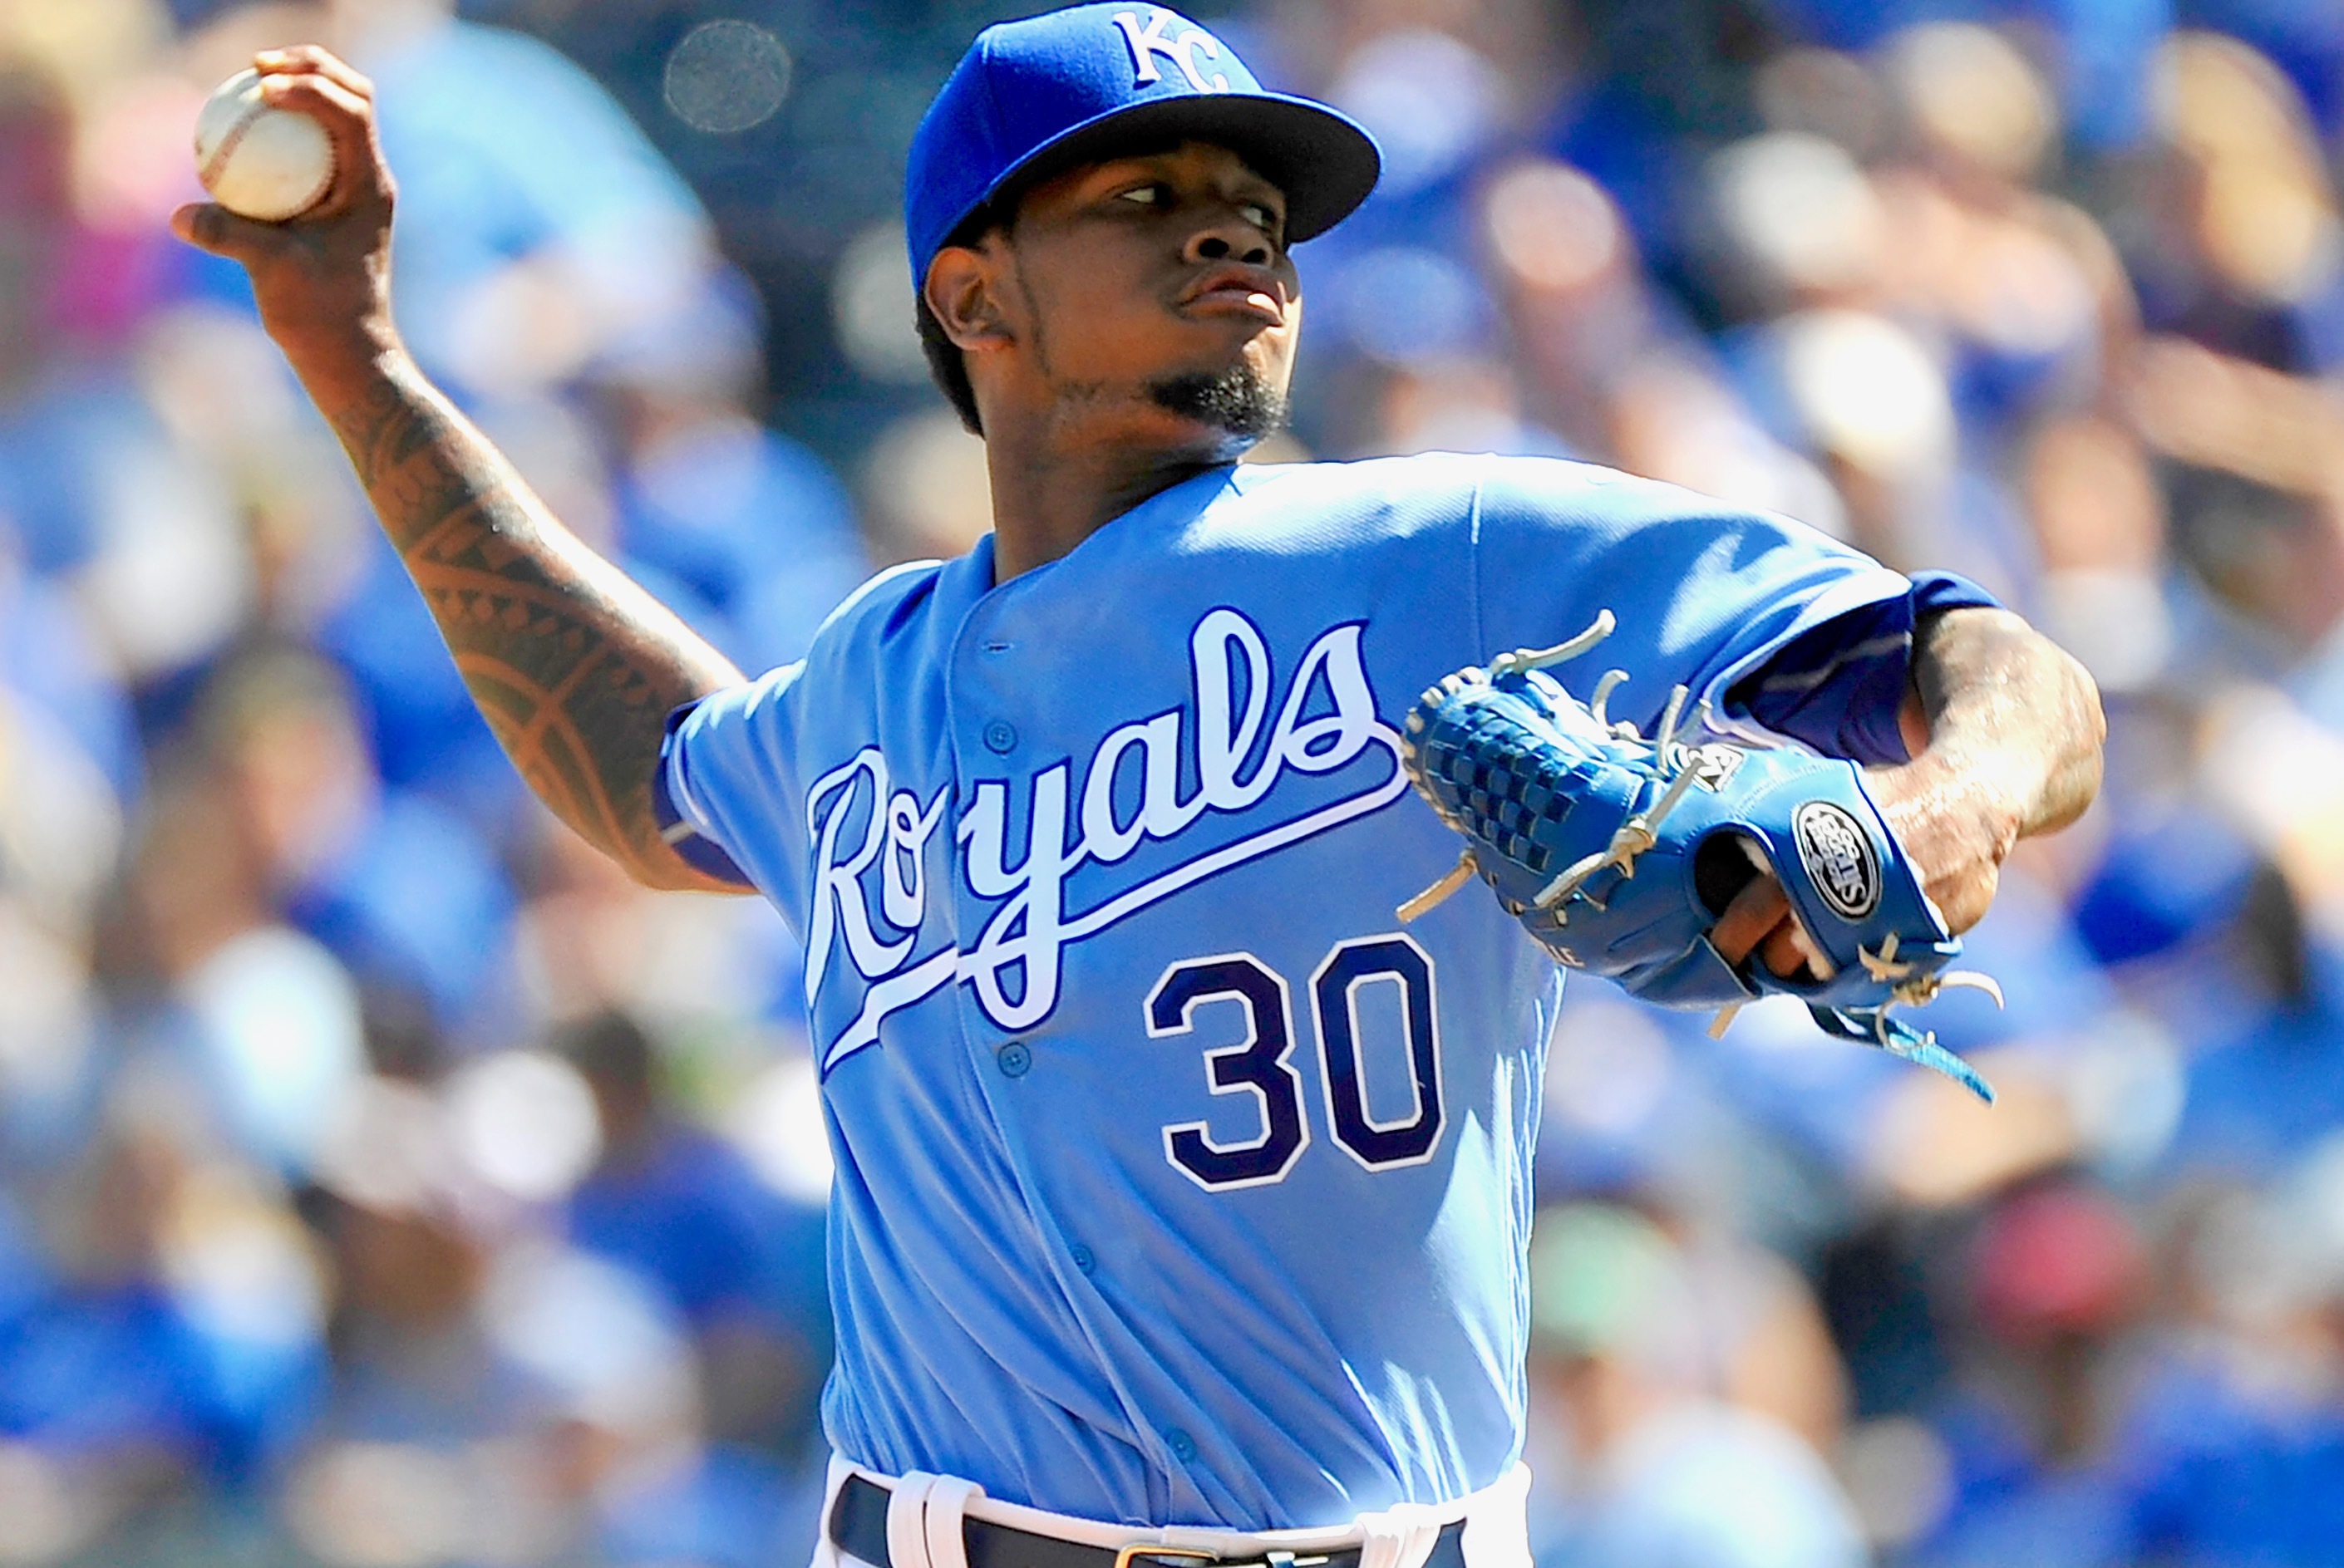 Mourners pay respects to Yordano Ventura